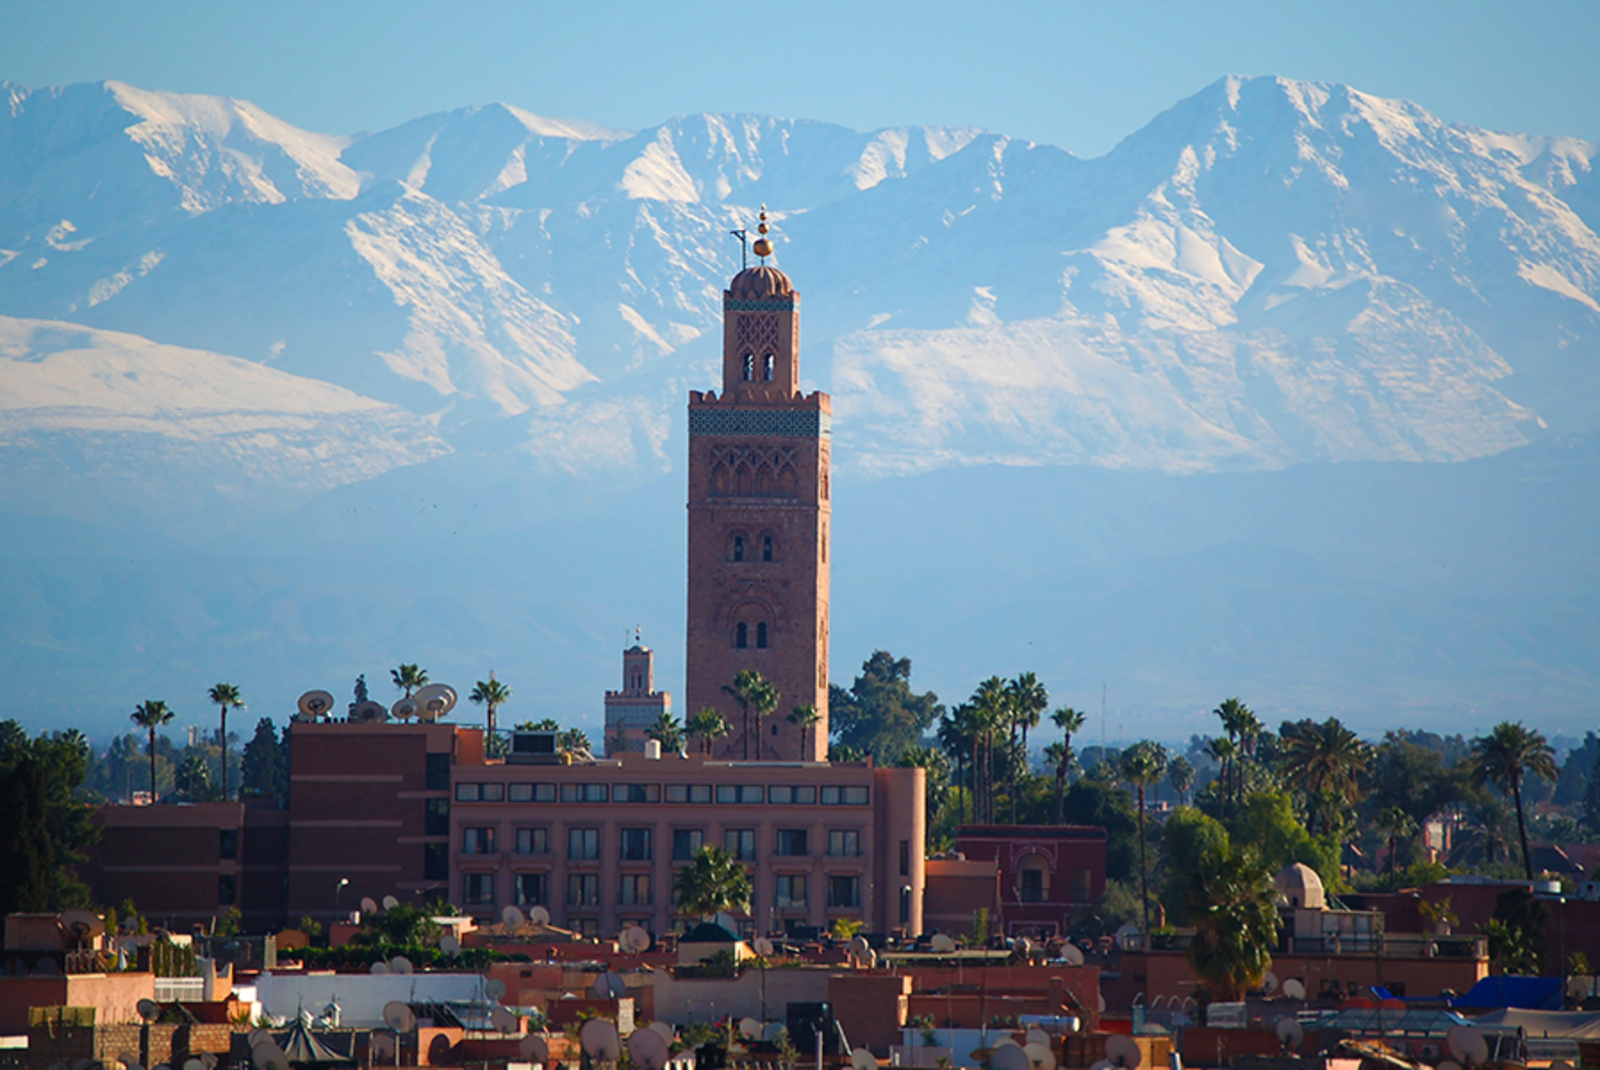 Culture and Relaxation in Morocco: 10-Day Itinerary - Day 5: Head to Marrakech